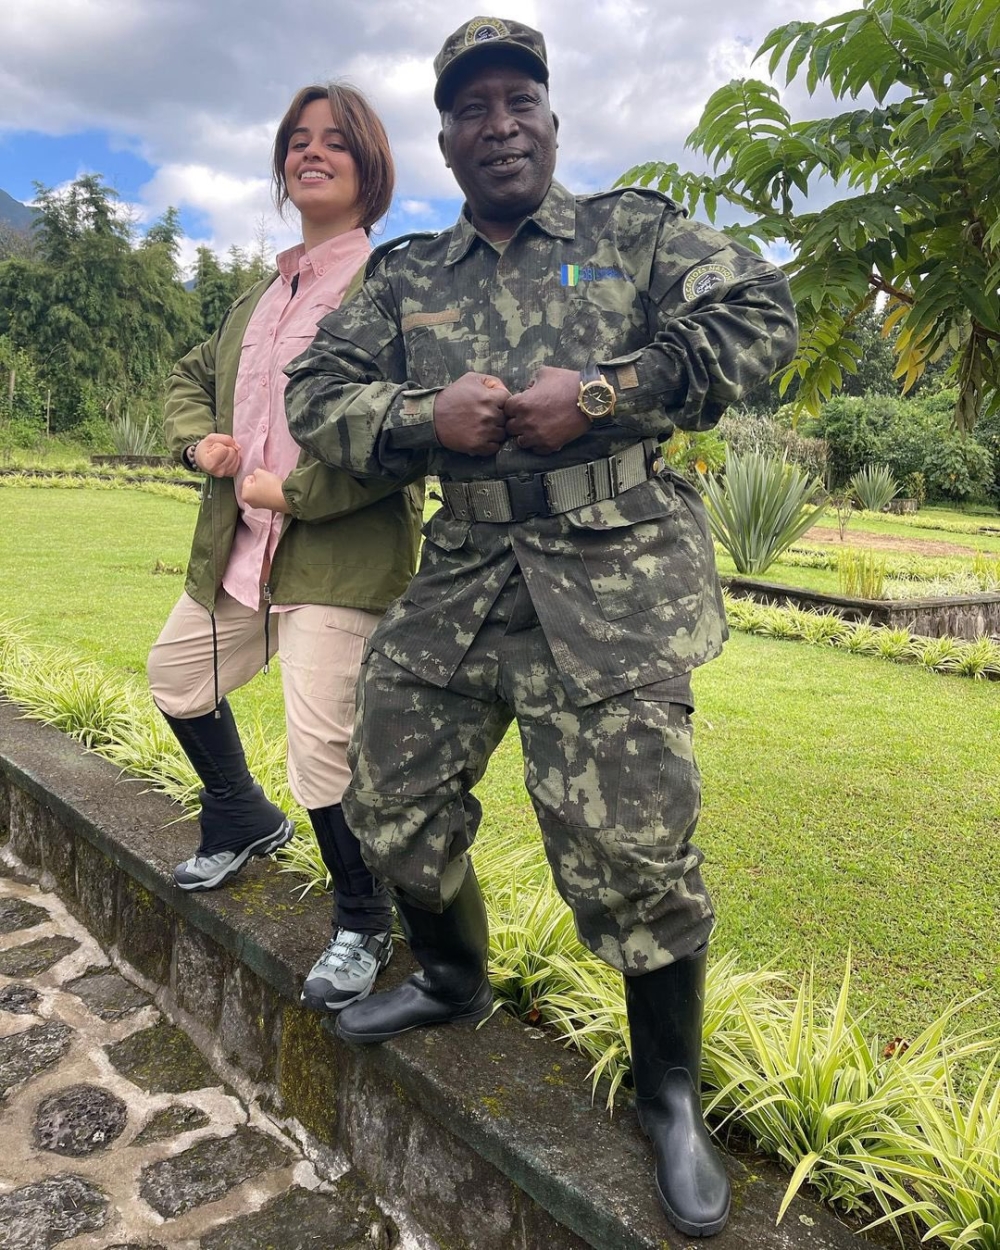 Camila Cabello “the world's luckiest person” after visiting gorillas in Rwanda